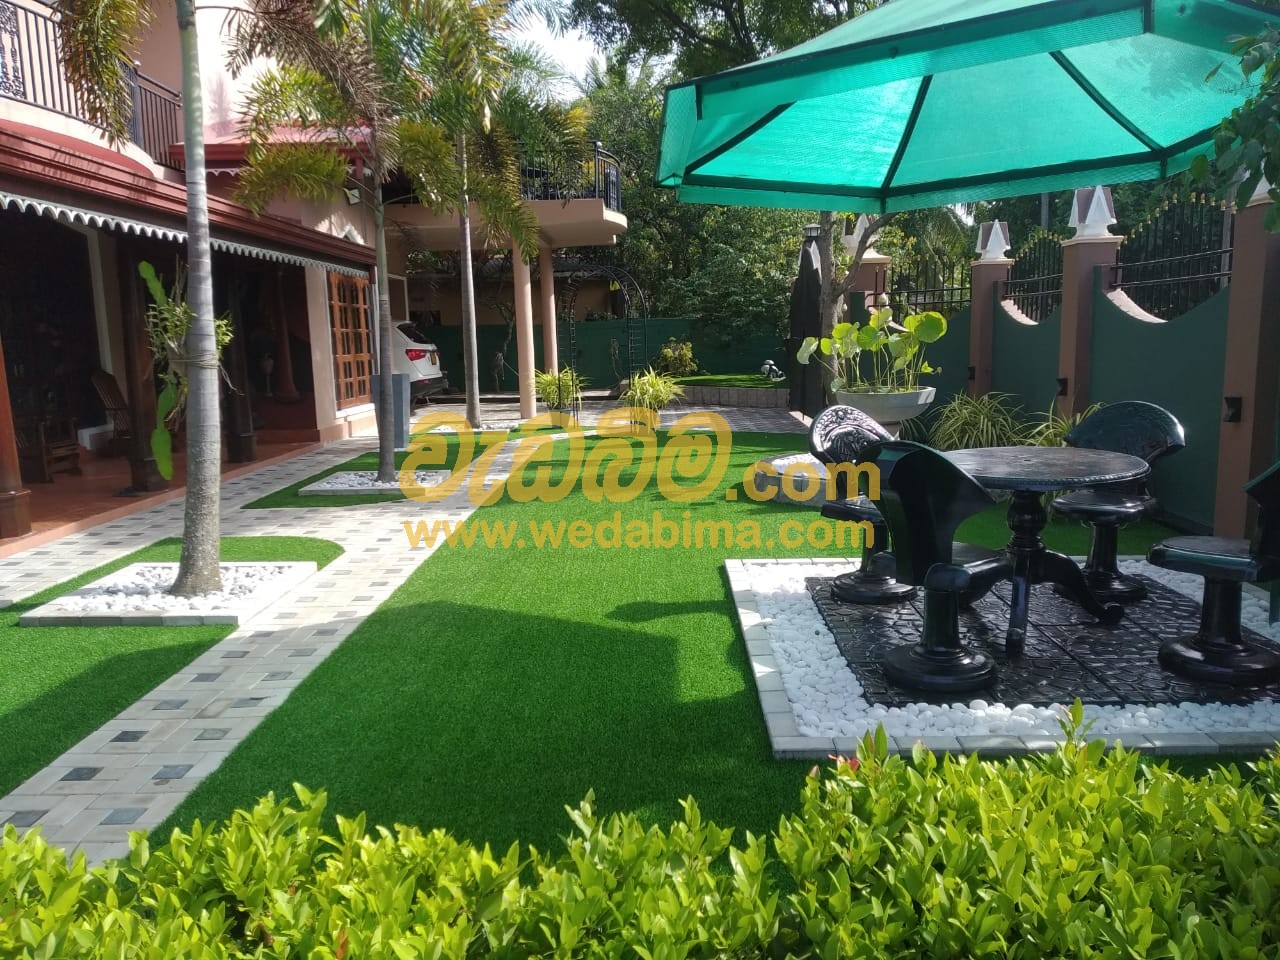 Grass Suppliers in Colombo